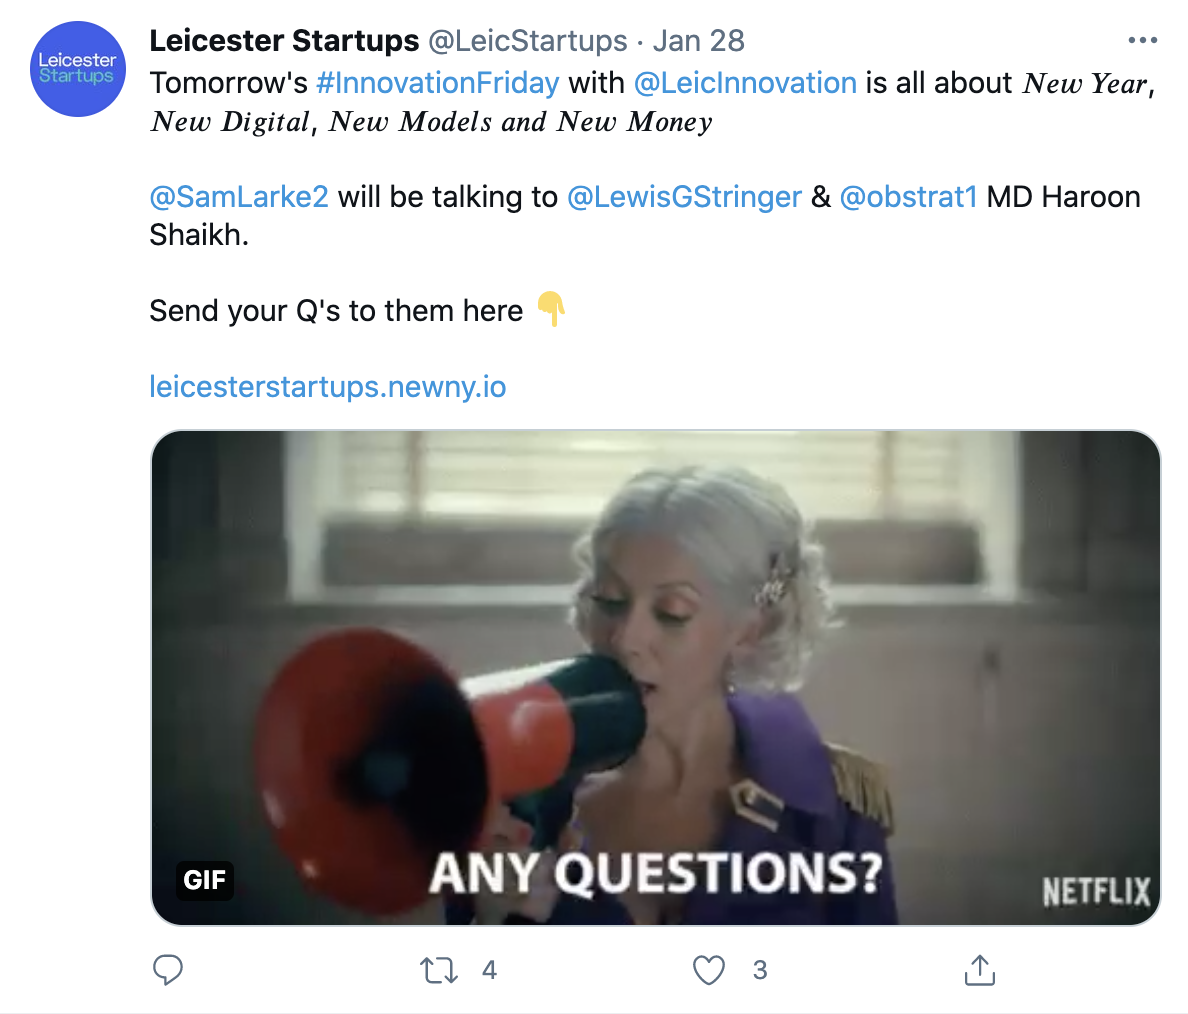 Leicester Startups tweeting their Newny link